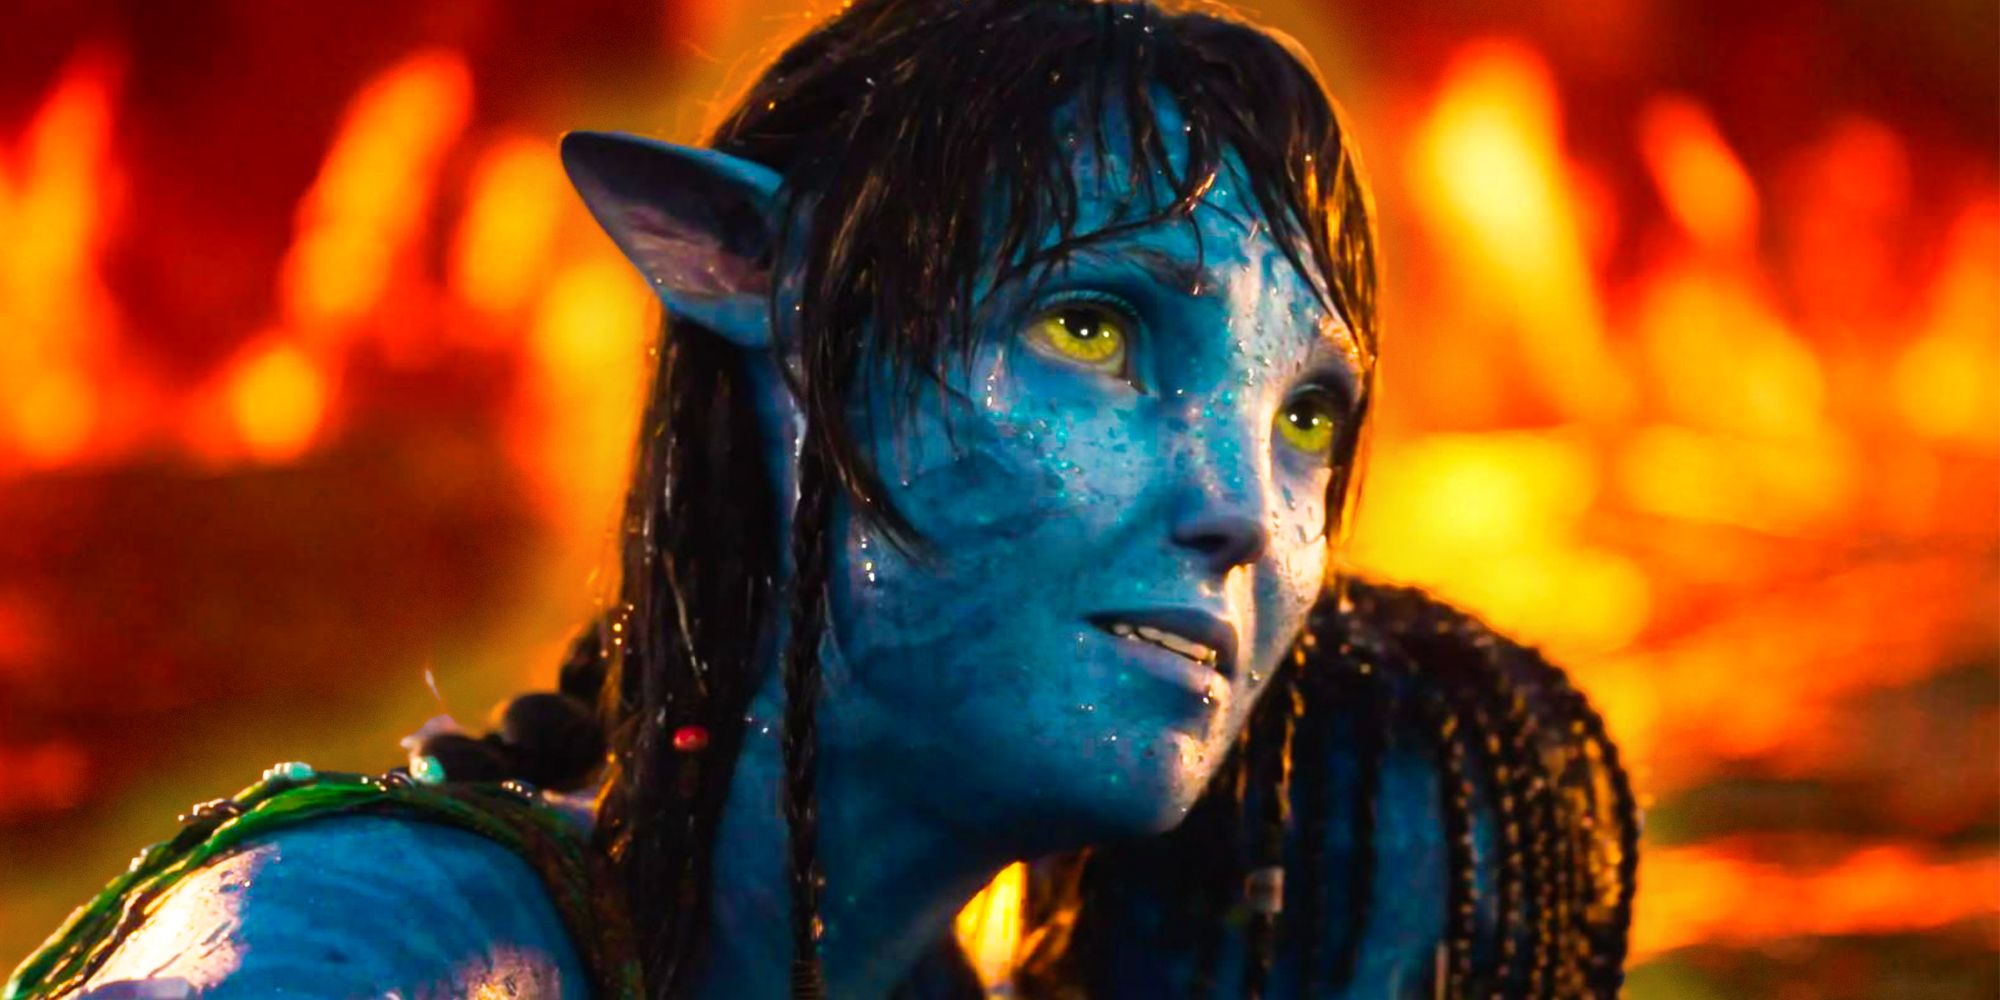 Avatar 3 Title Rumor Debunked By Producer: “That Is Getting Changed Tonight!”